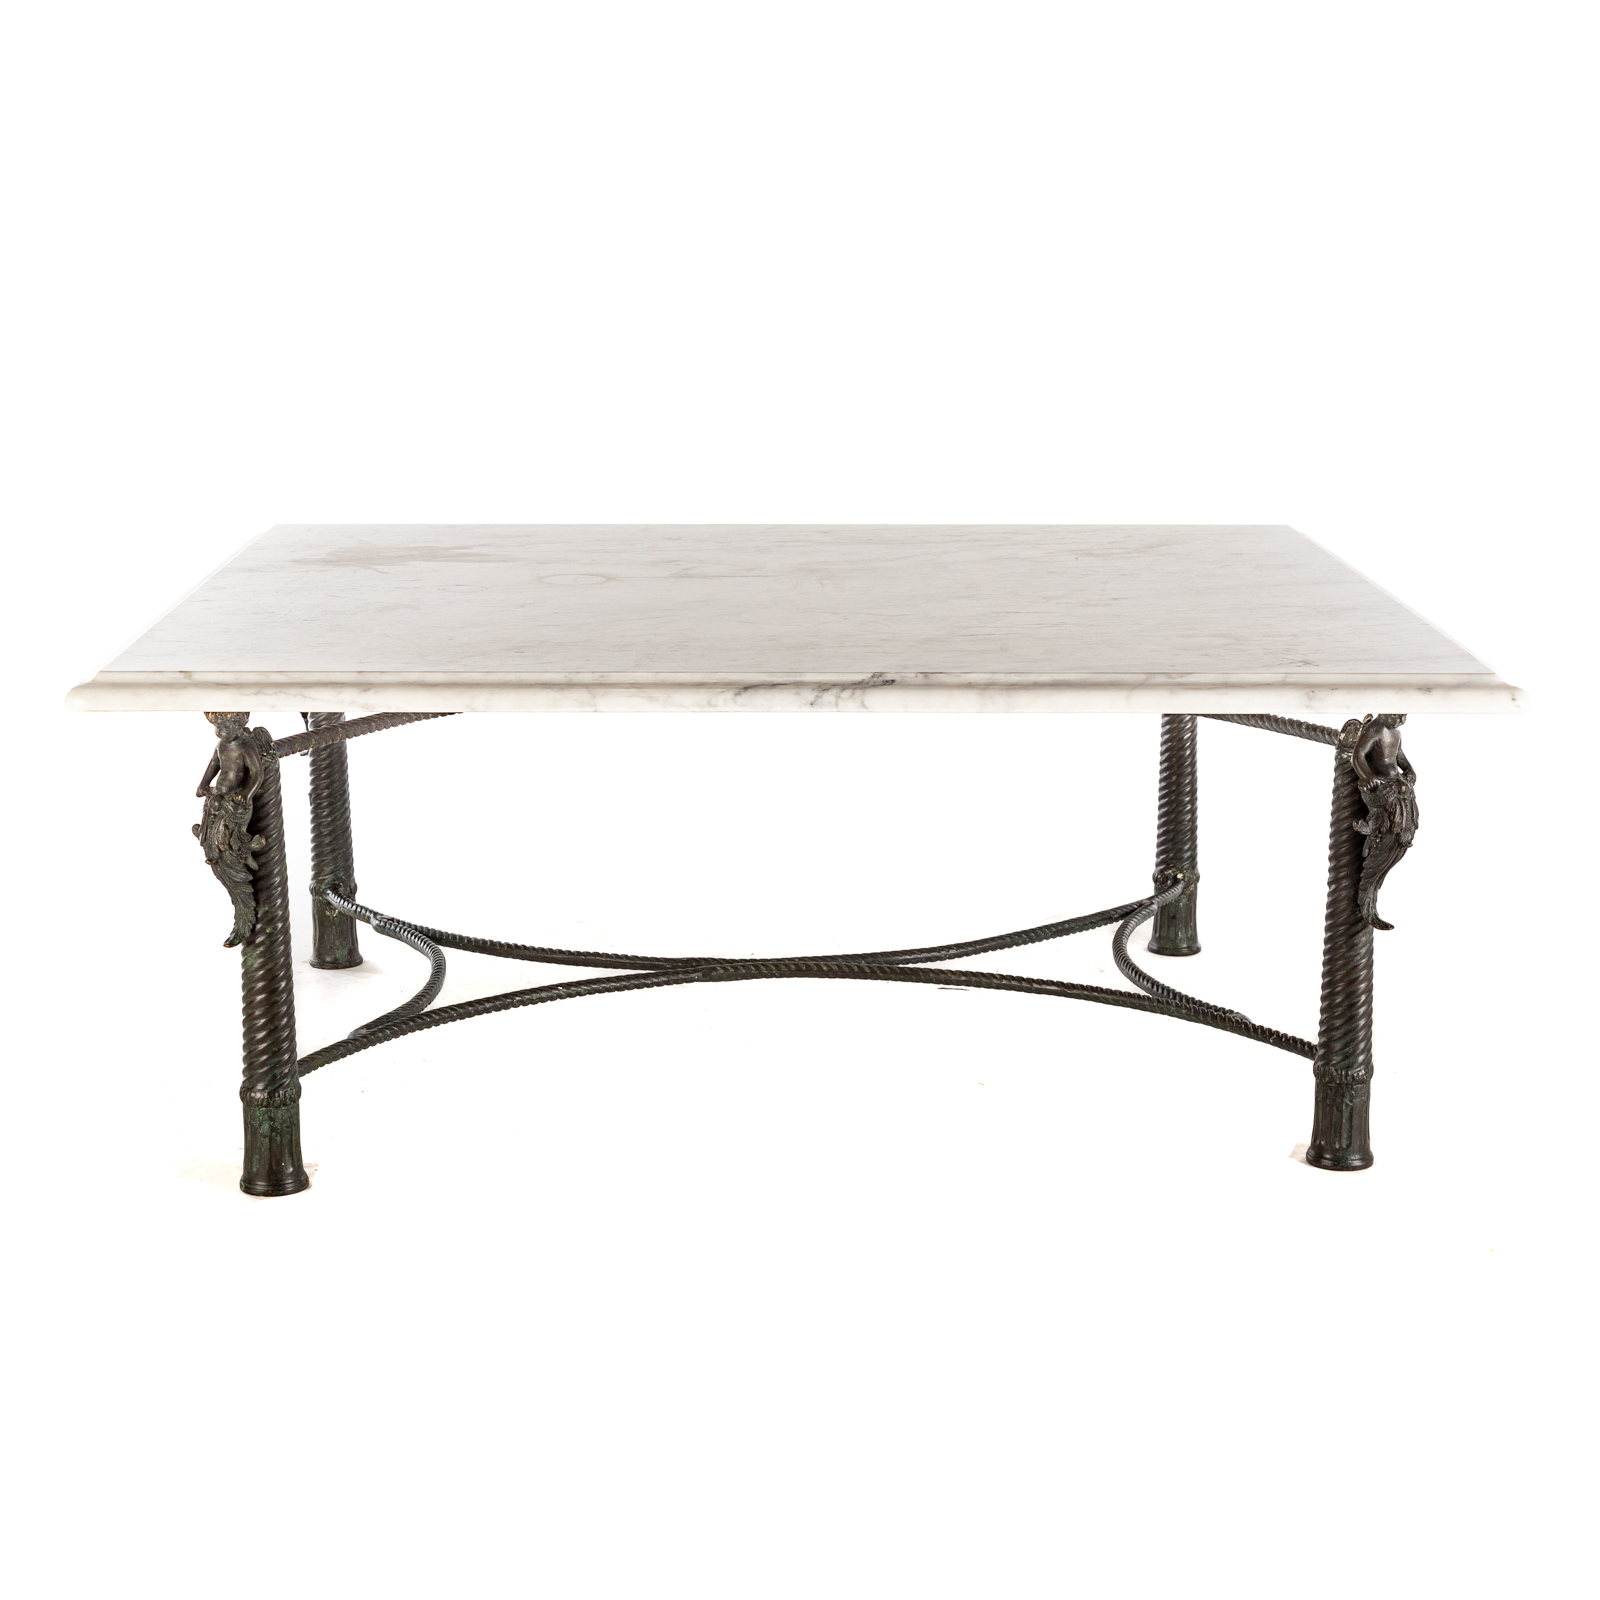 MARBLE TOP TABLE WITH FIGURAL METAL 3cb629